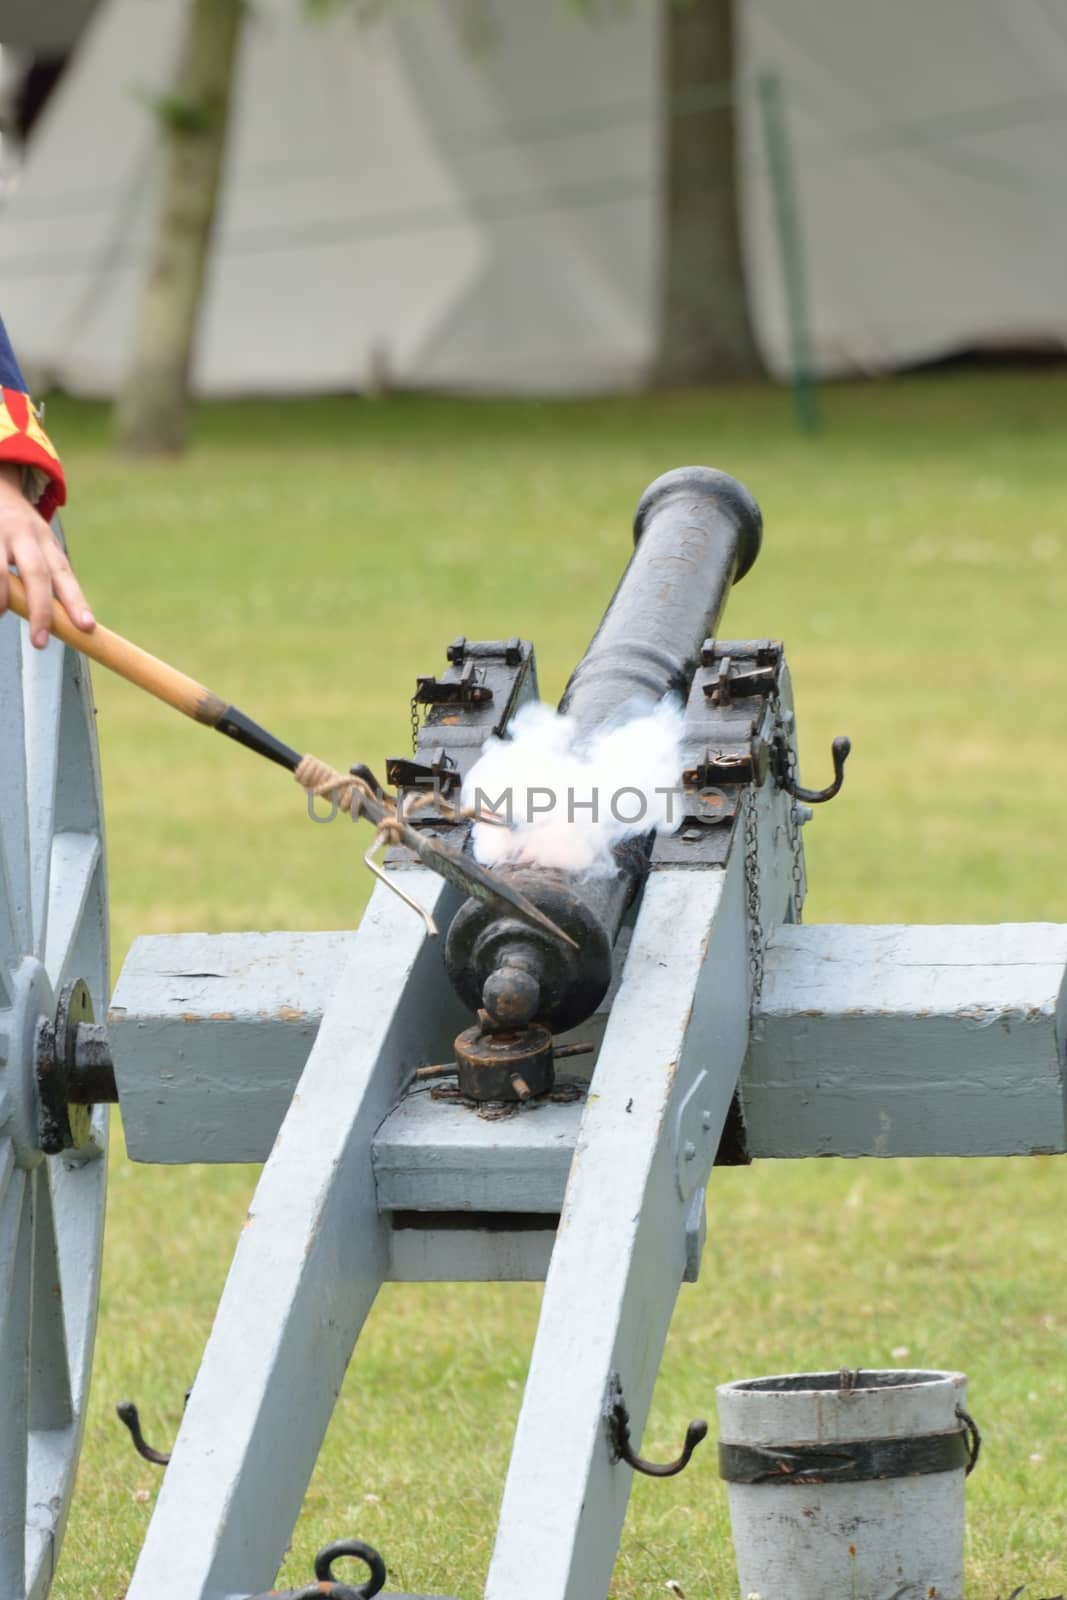 Napoleonic cannon being fired